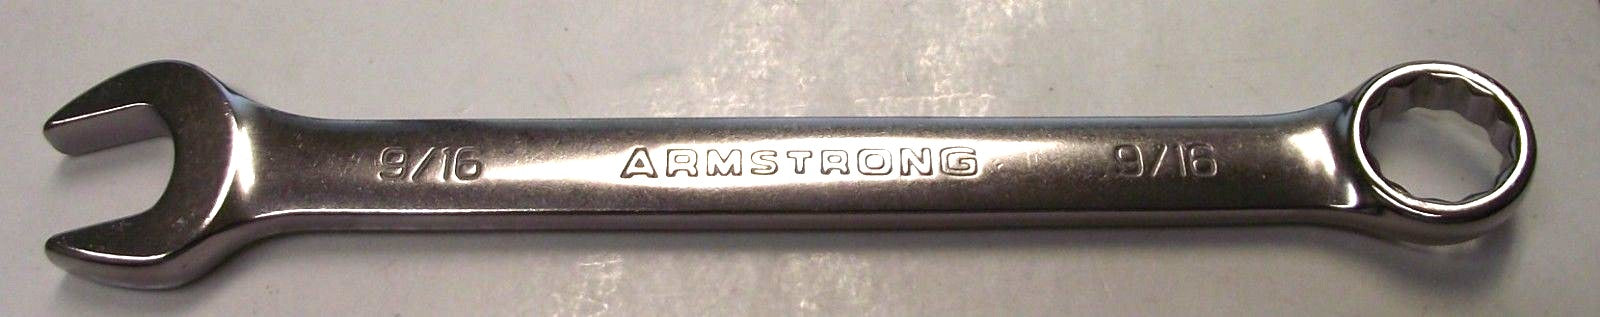 Armstrong 25-118 9/16" 12pt Full Polish Combination Wrench USA